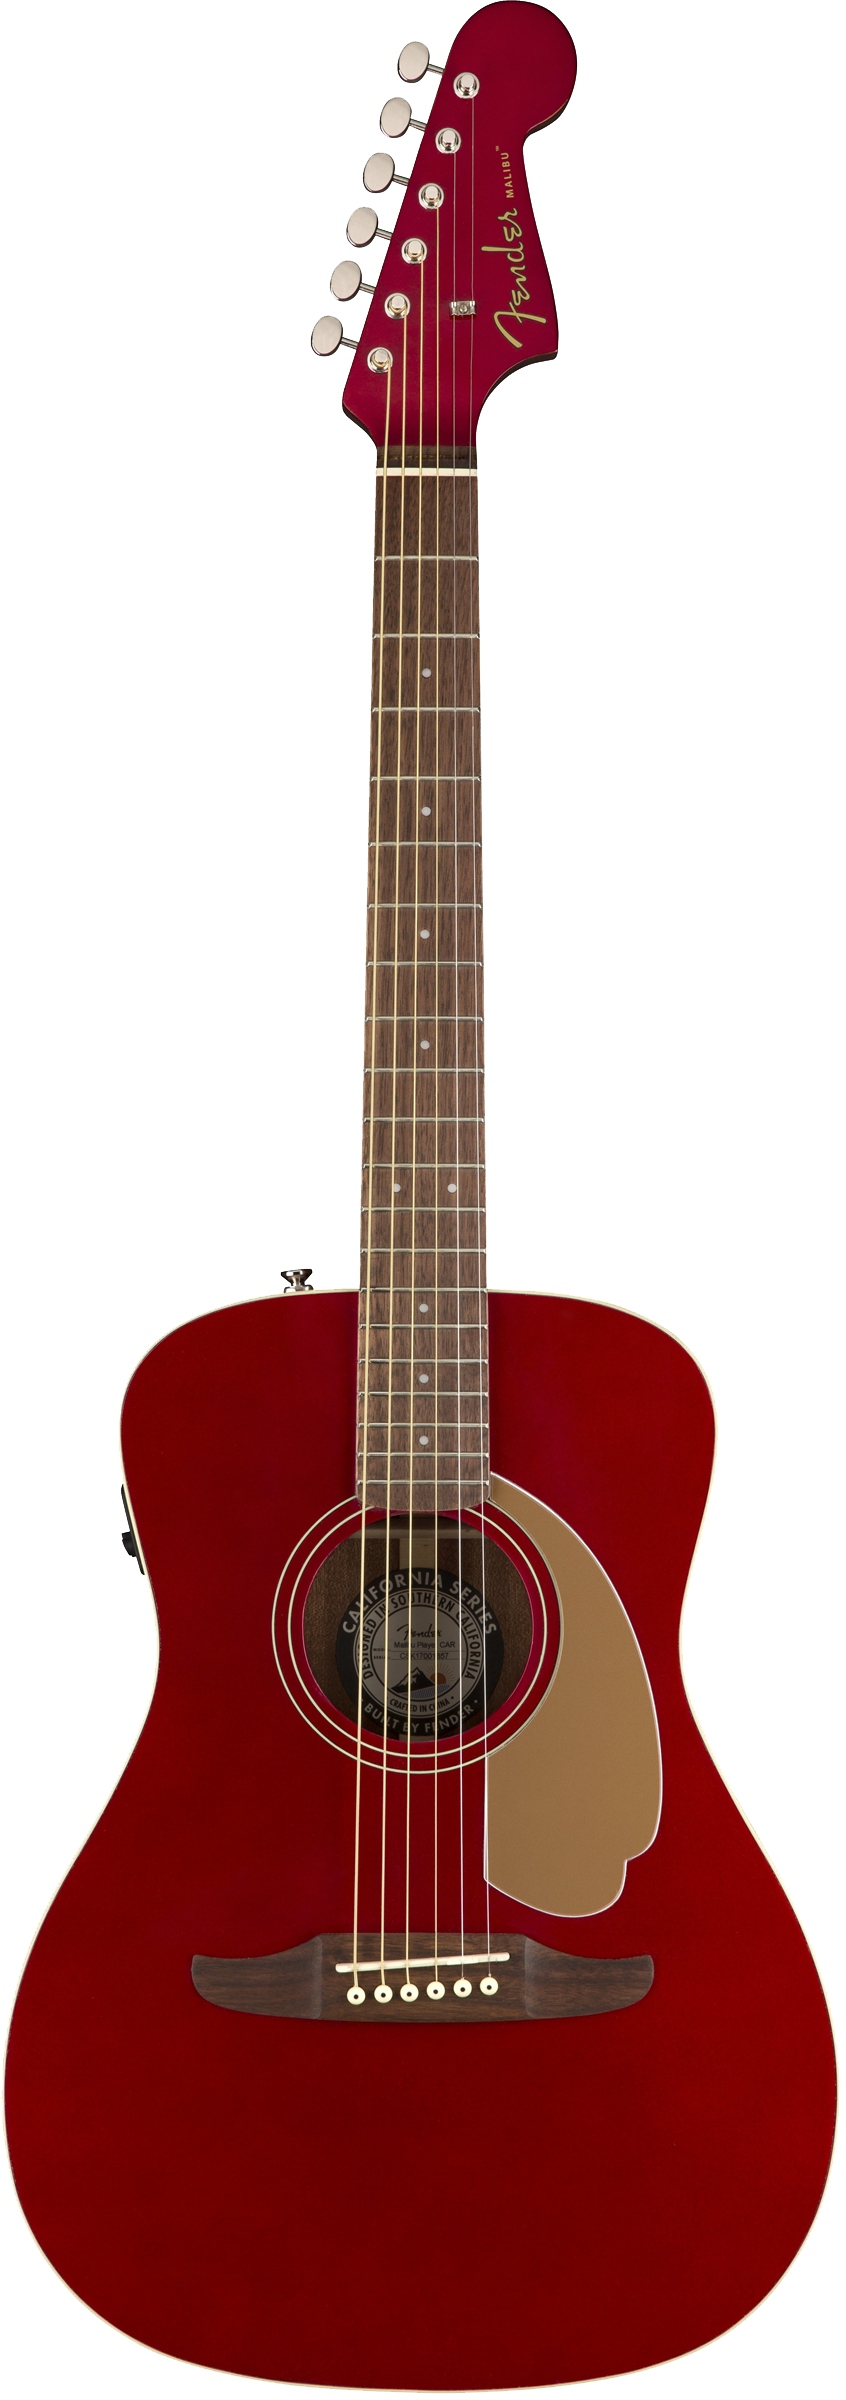 Fender Malibu Player Acoustic / Electric Guitar - Candy Apple Red